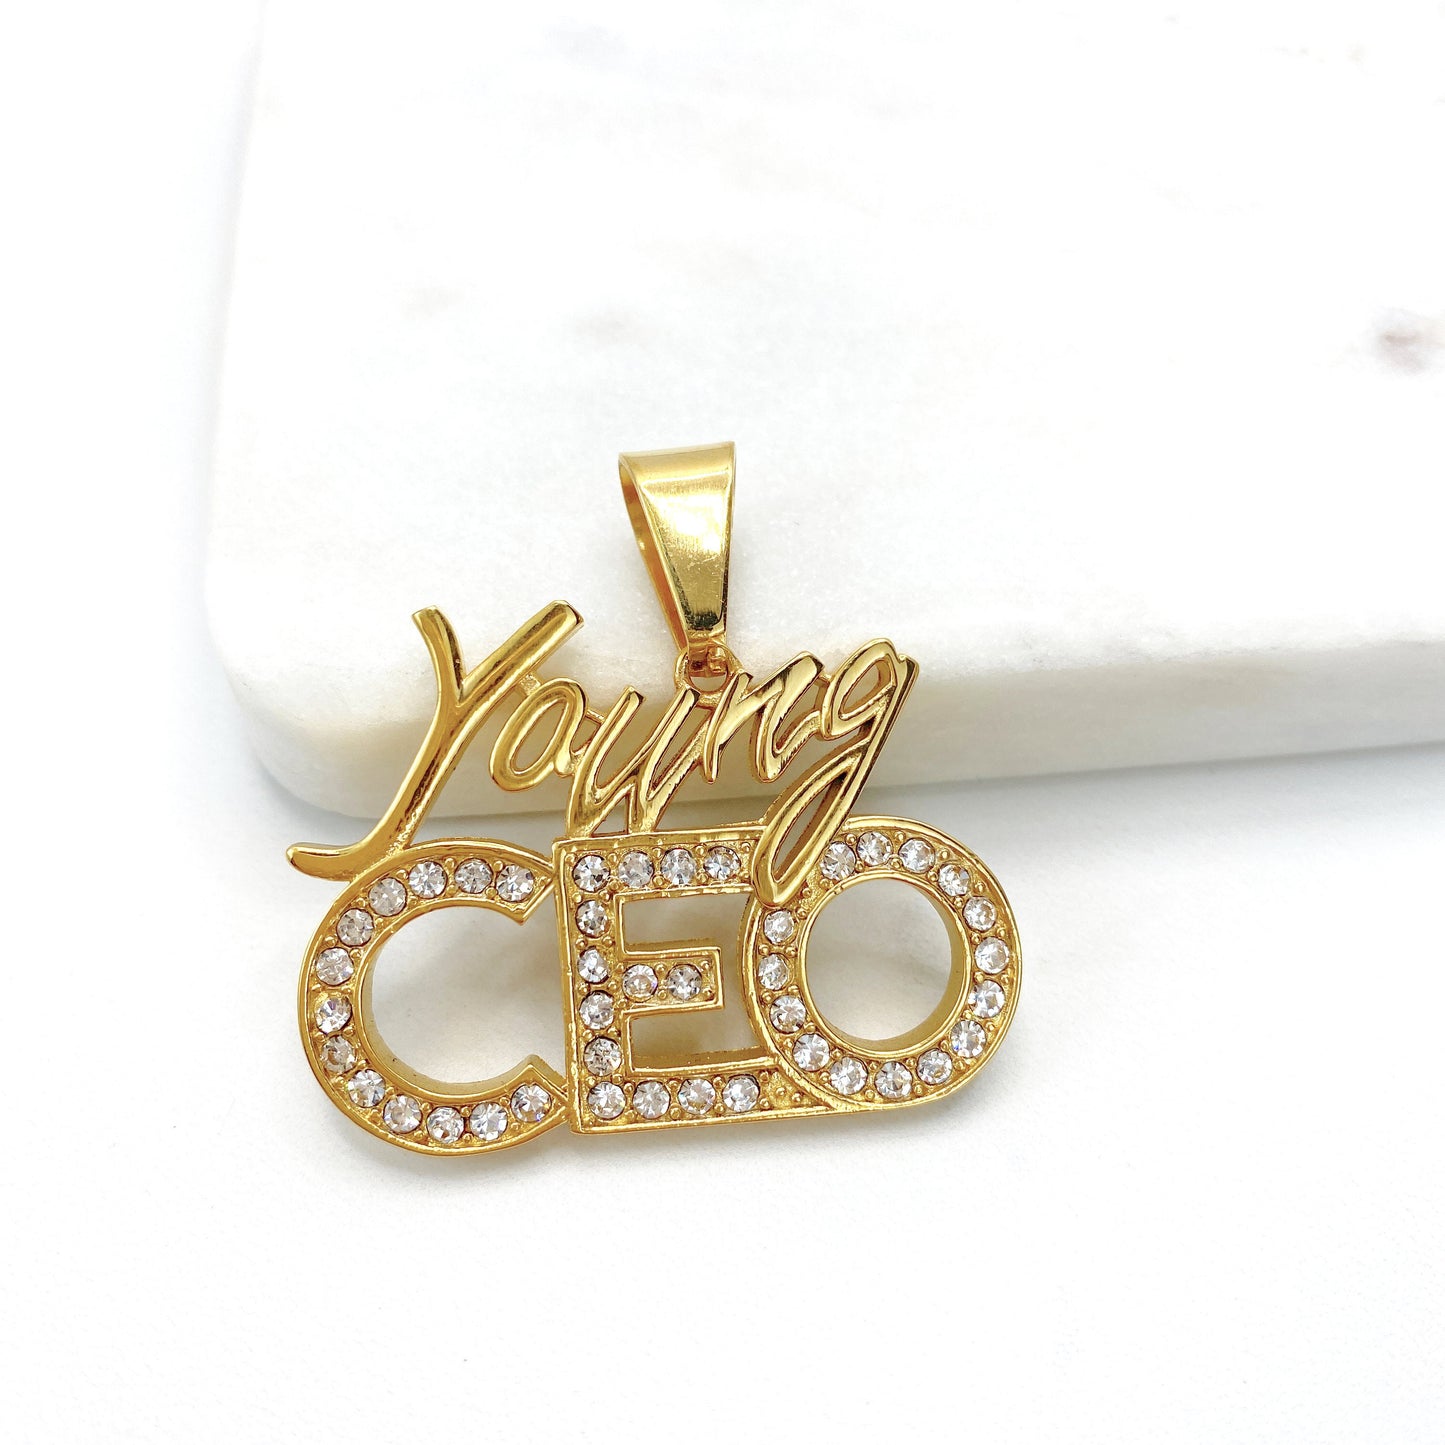 Stainless Steal, Cubic Zirconia ''Young CEO'' Charms Pendant, Gold or Silver, Wholesale Jewelry Making Supplies